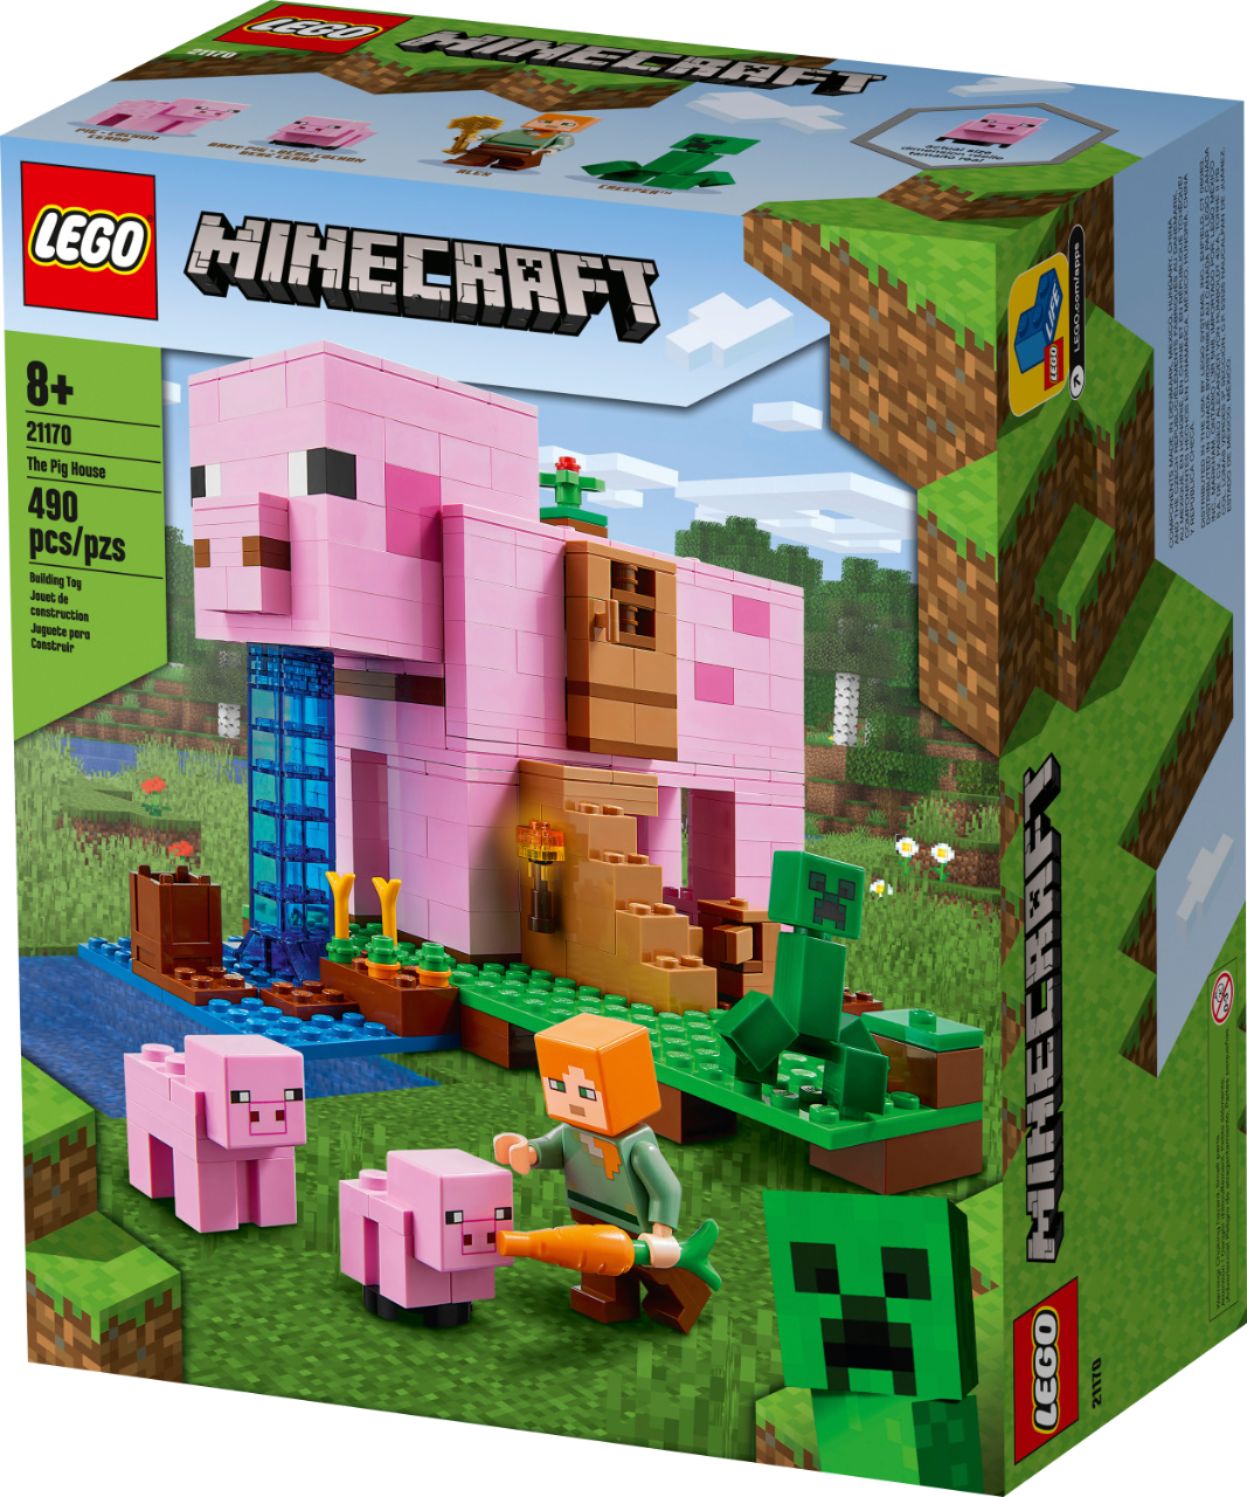 Angle View: LEGO - Minecraft The Pig House 21170